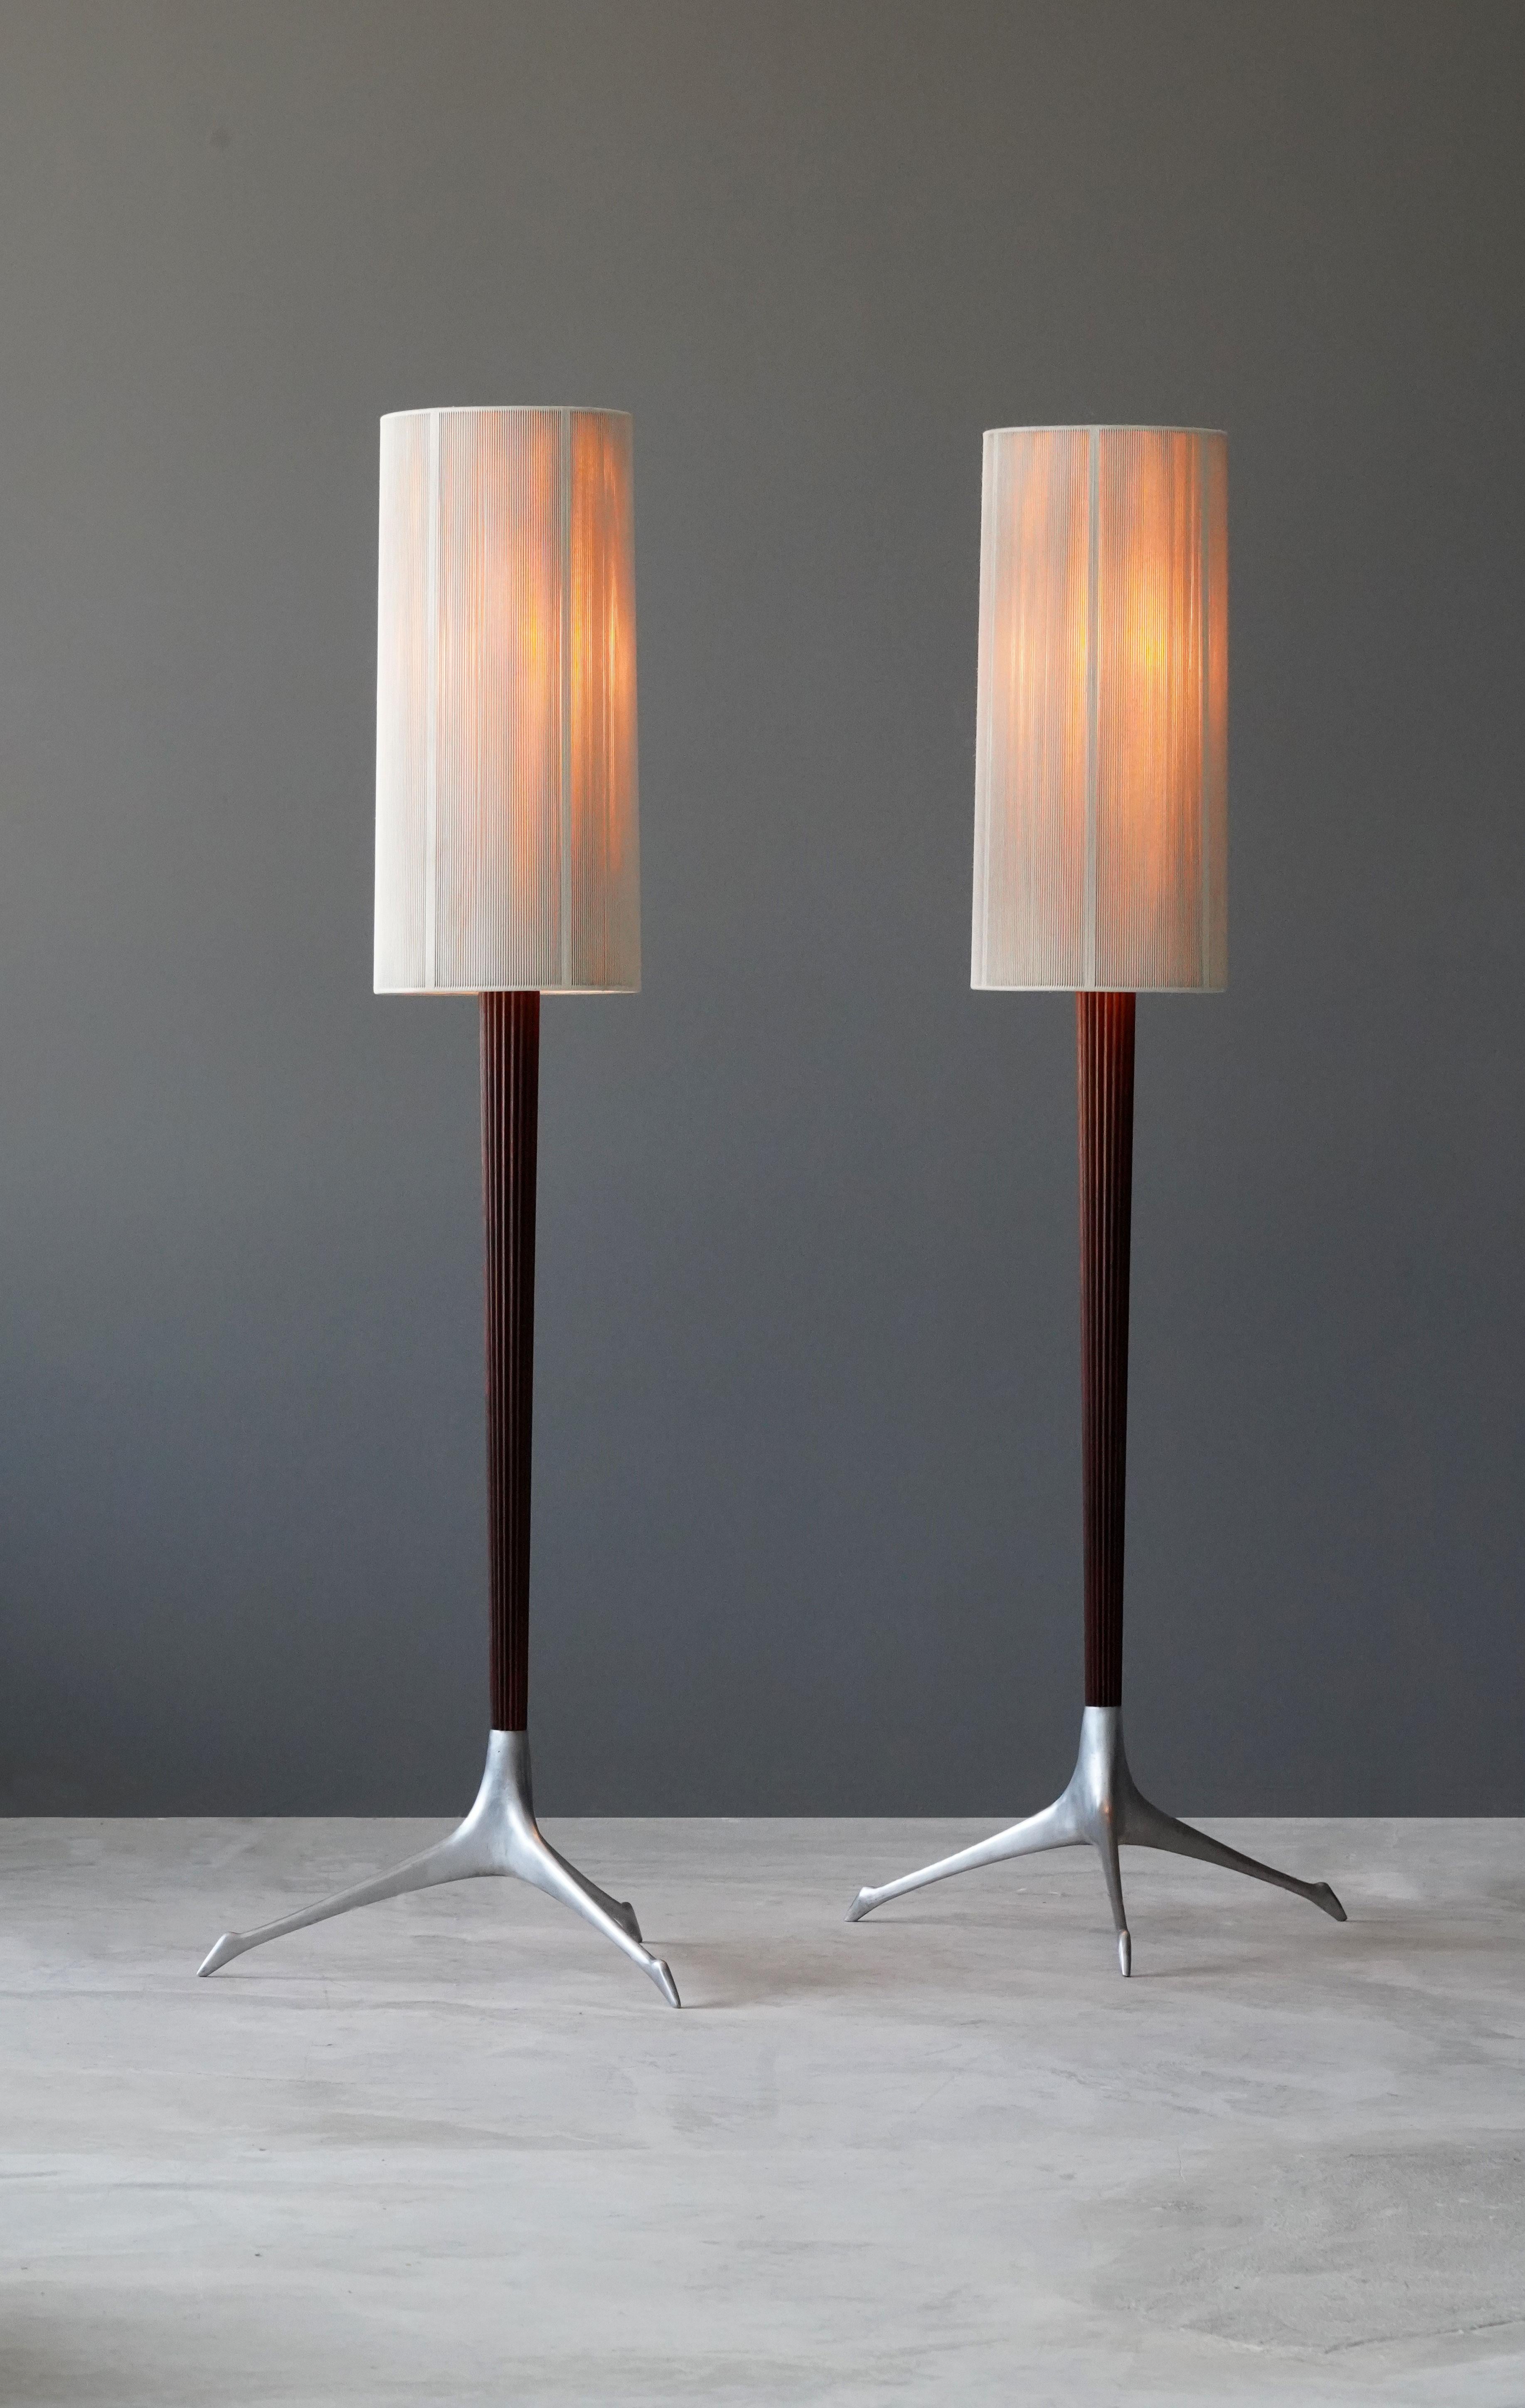 A pair of rare floor lamps, designed by Vladimir Kagan and produced by Kagan-Dreyfus Inc, circa 1958. Cast aluminum is paired with a finely carved mahogany rod, bears original nylon screens. 

Other American designers of the period include George